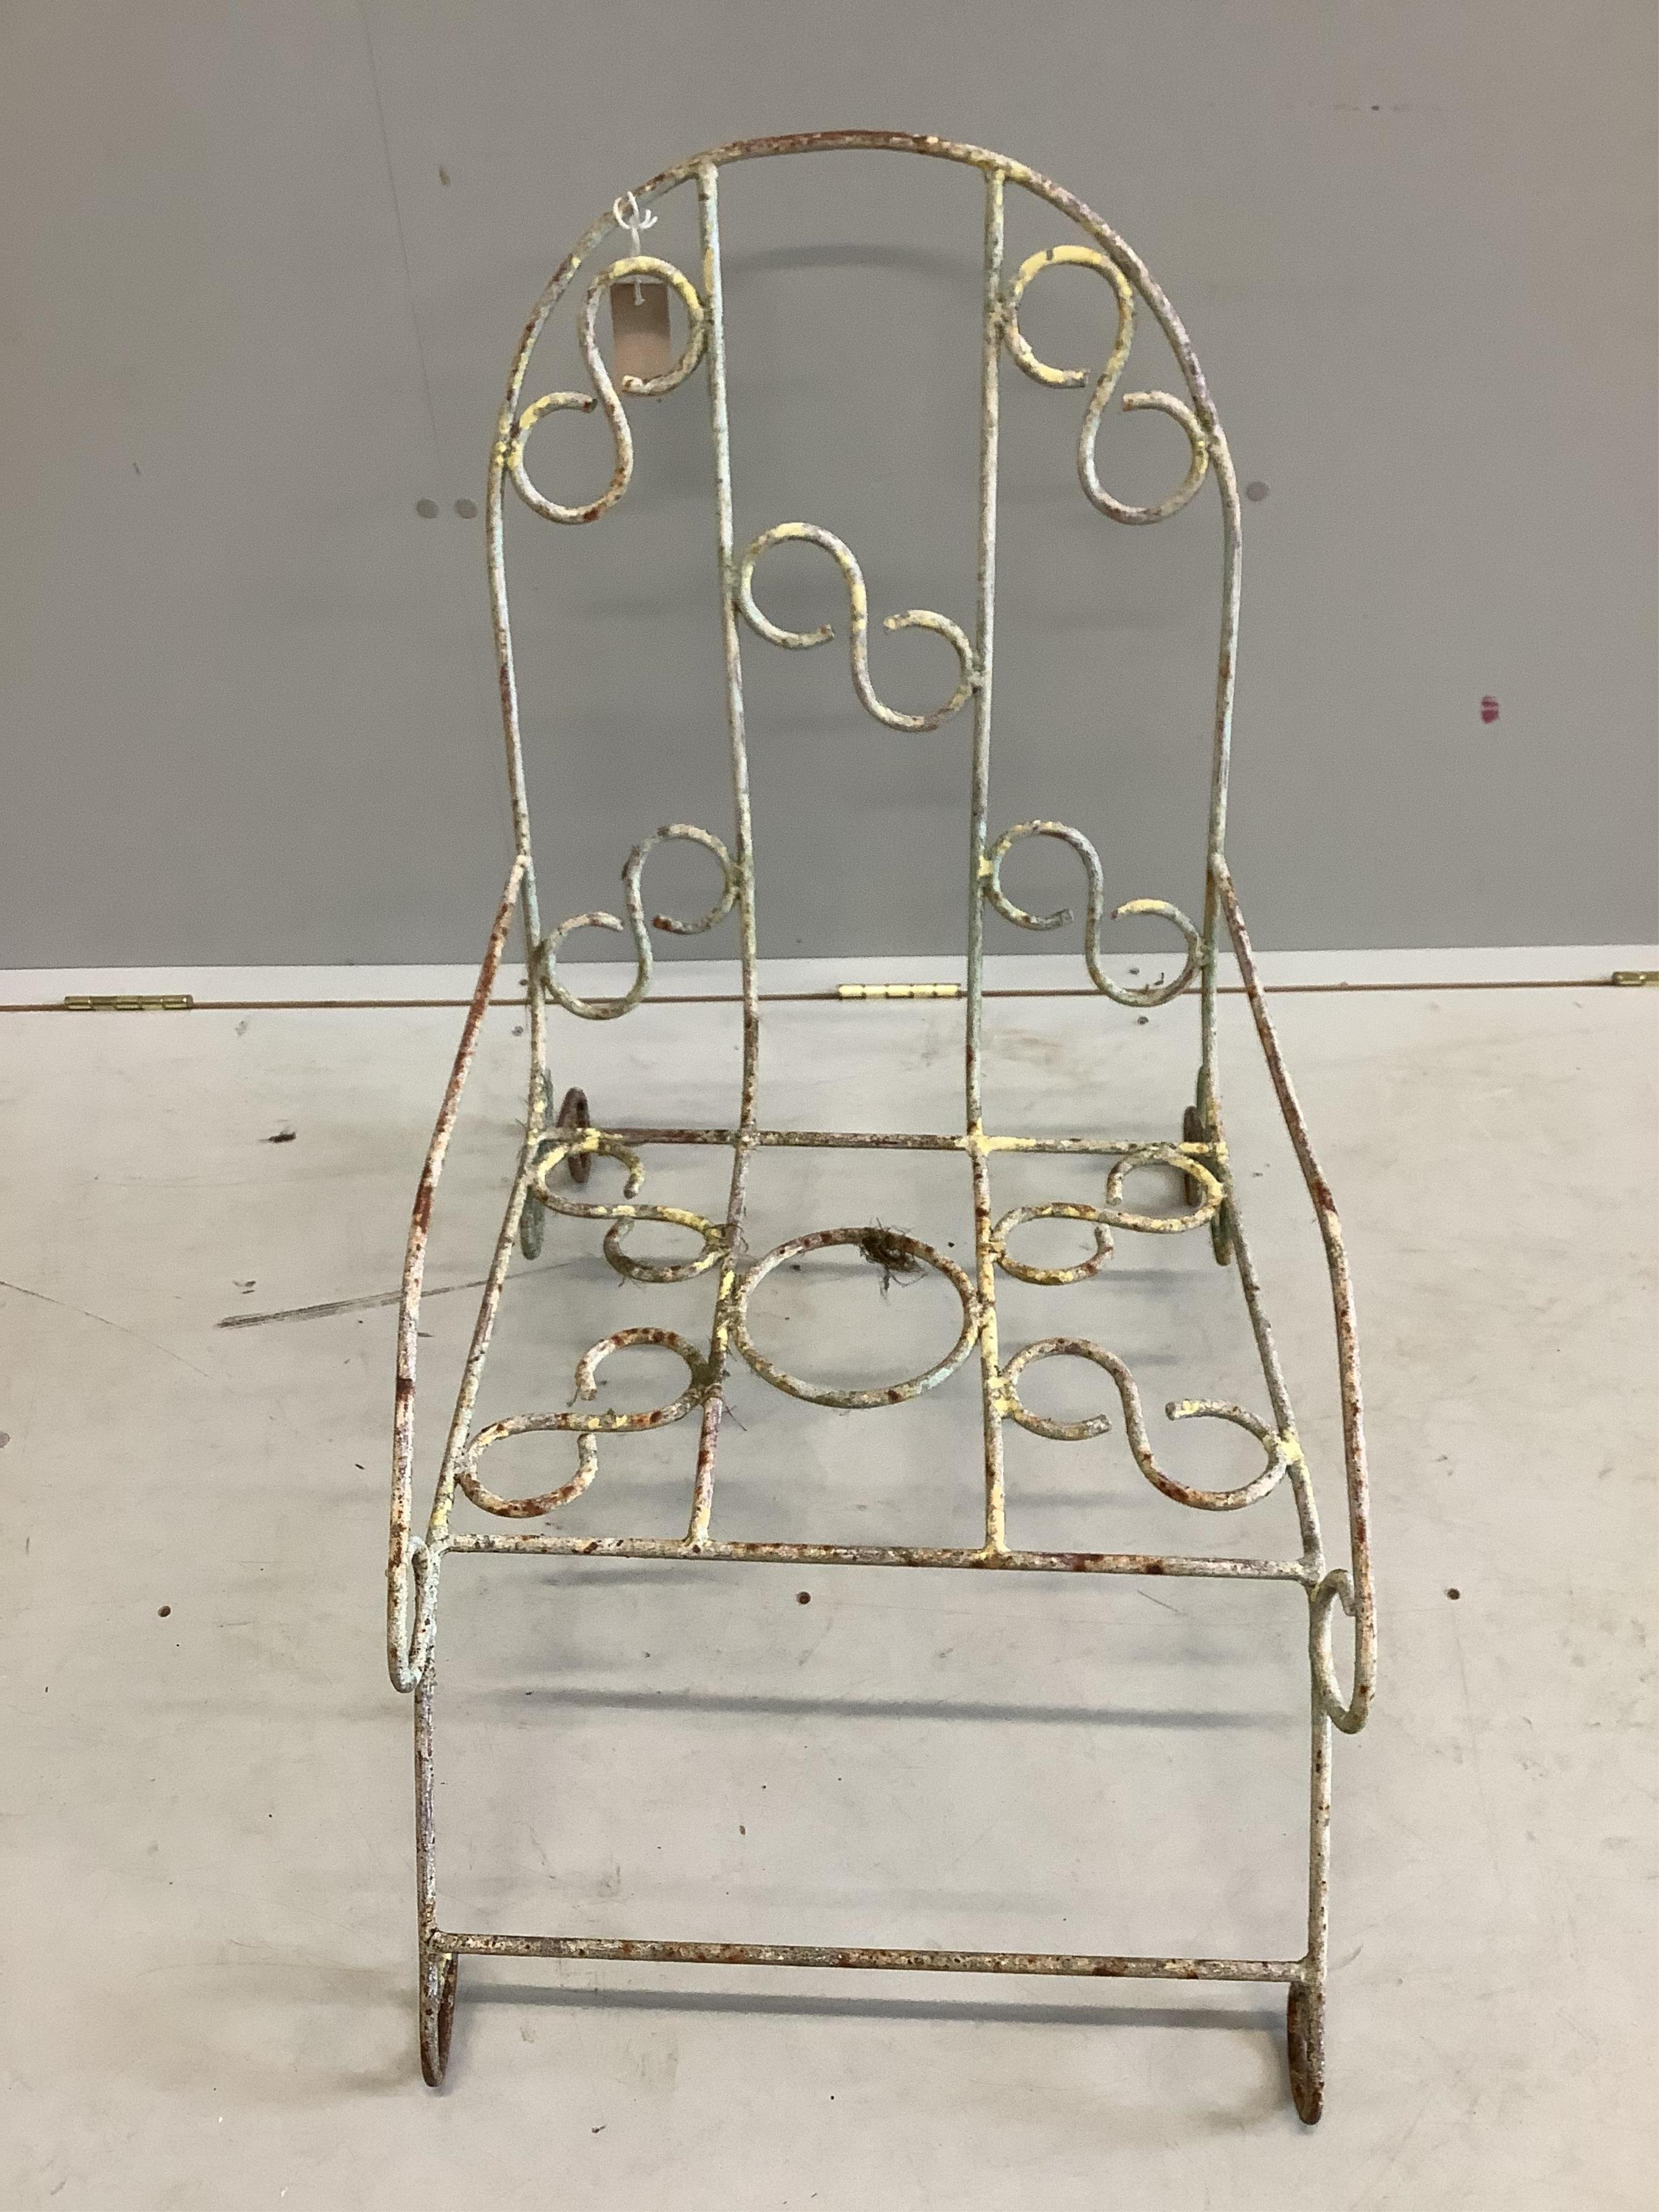 A vintage French wrought iron garden chair, width 48cm, depth 74cm, height 76cm. Condition - fair